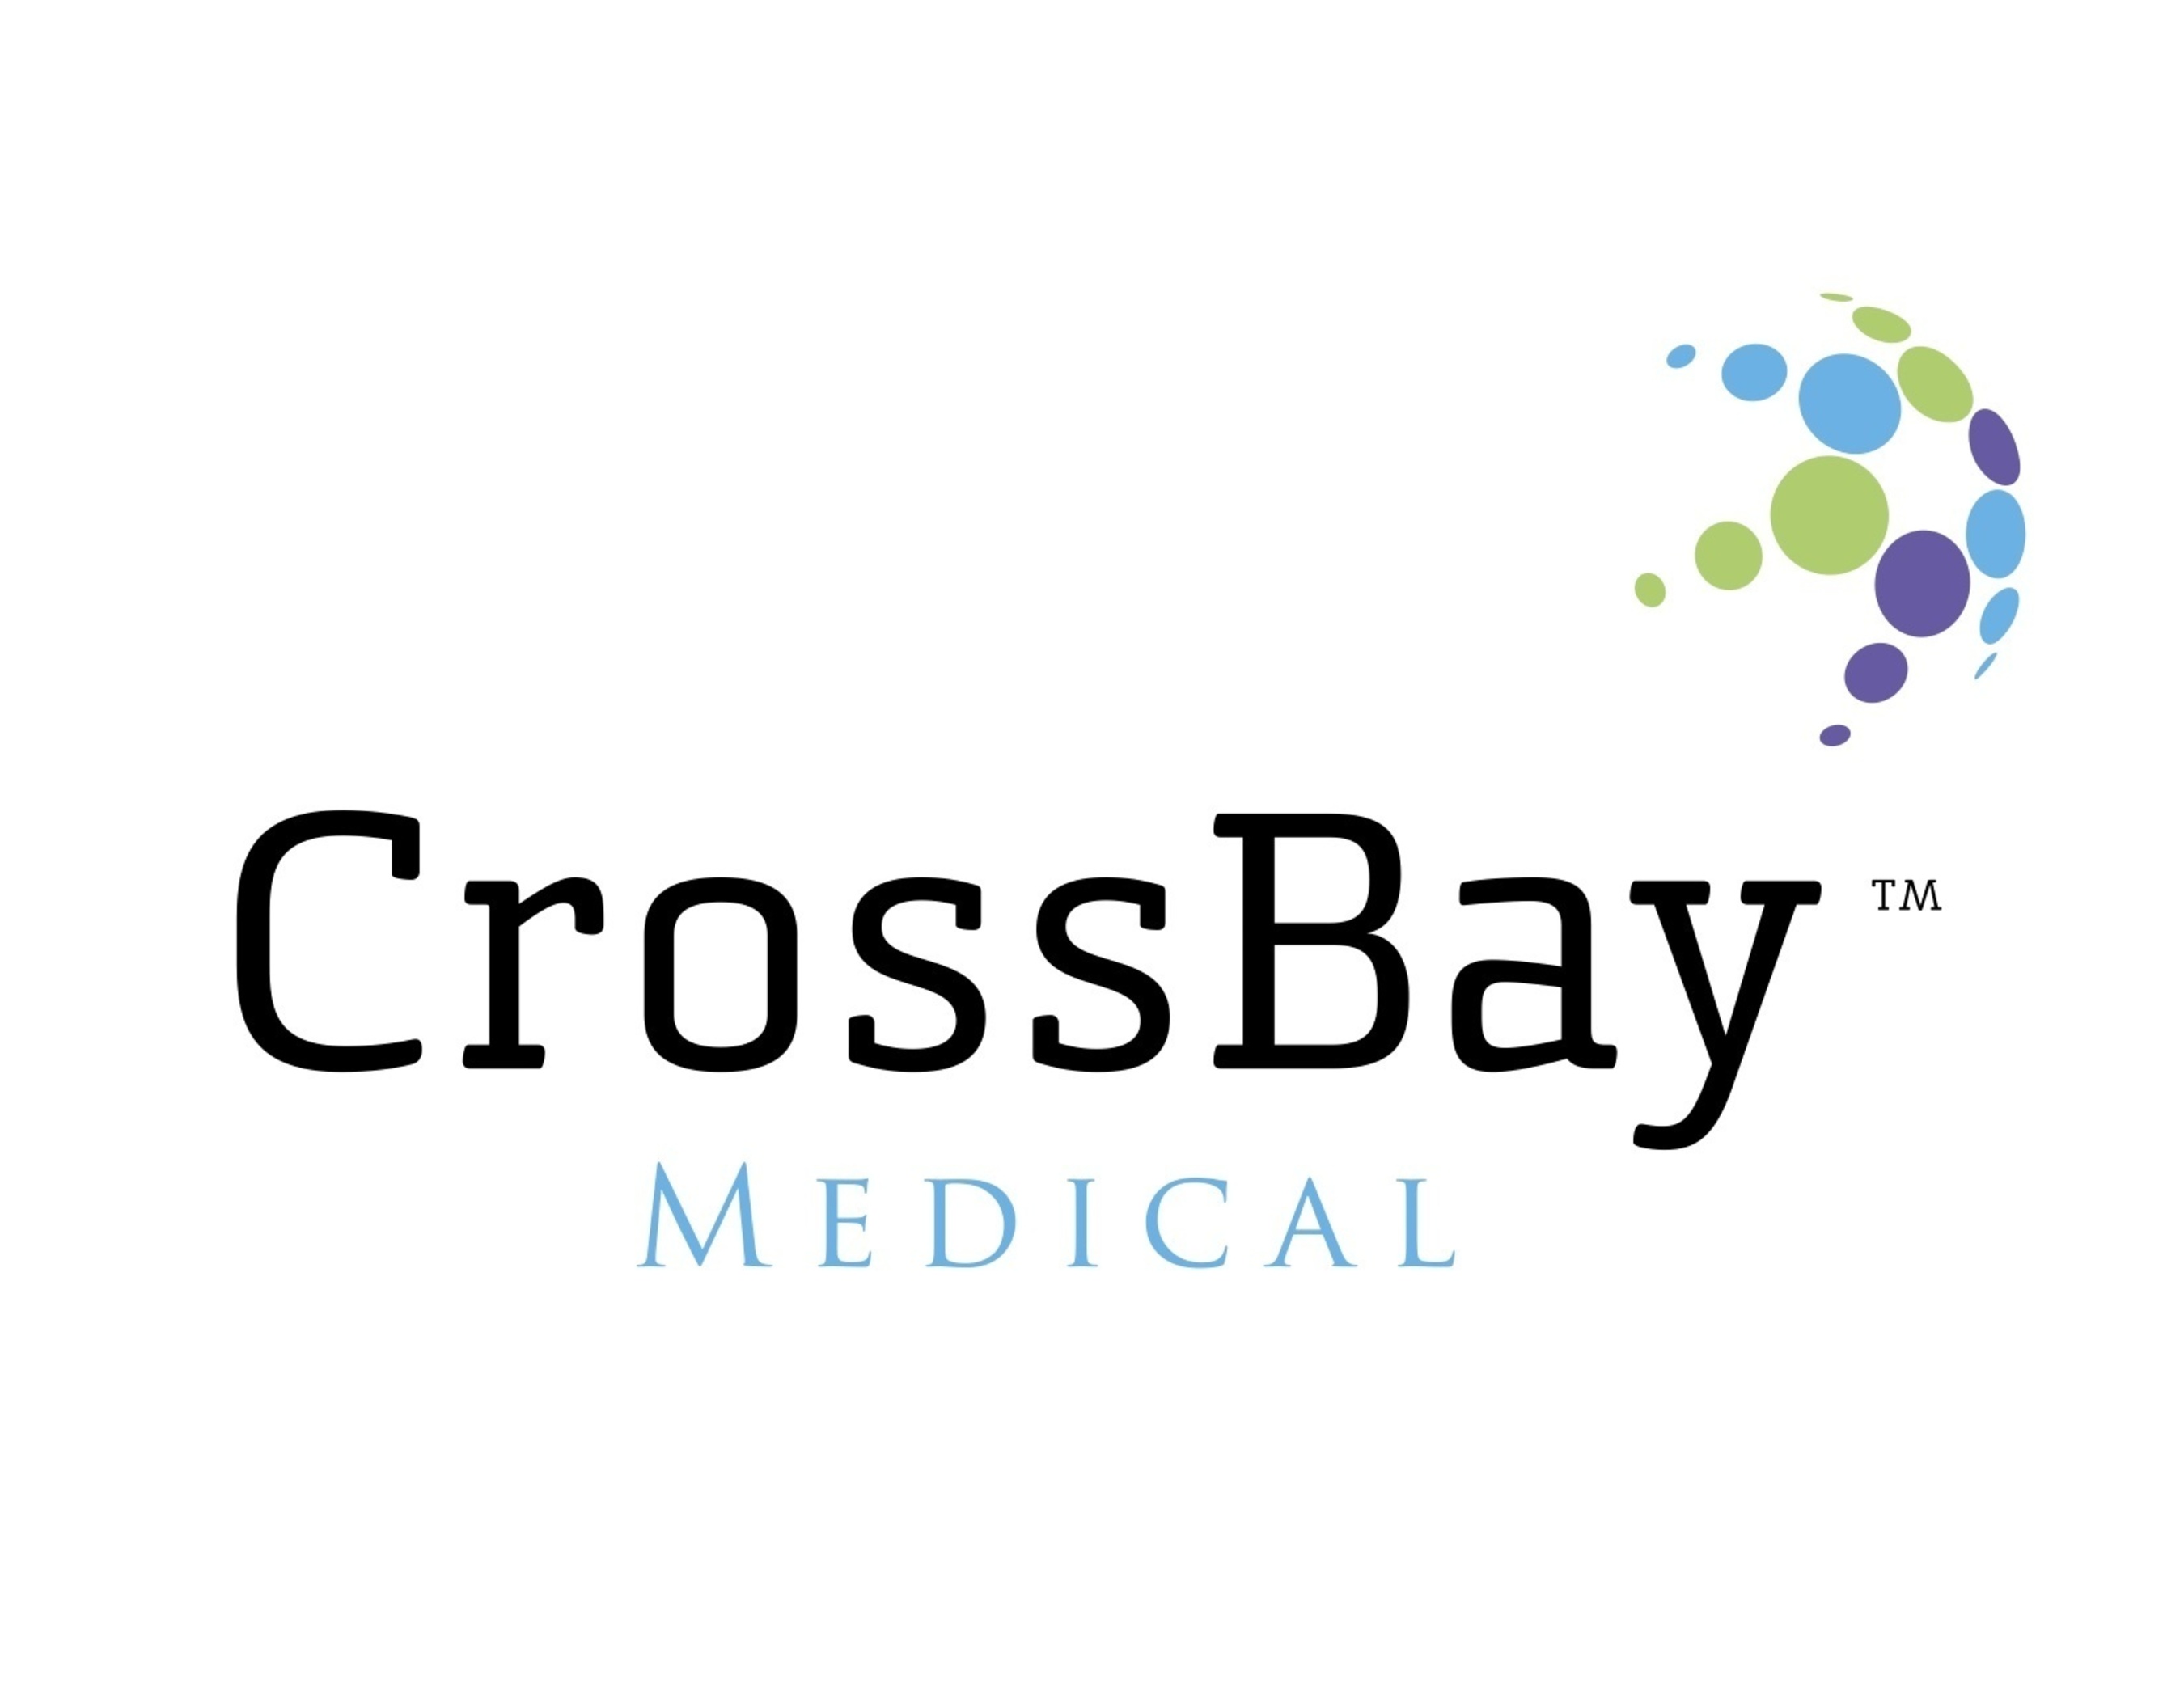 CrossBay Medical, Inc. was founded in 2009 with the goal of providing affordable healthcare products for women and children.  The strategic partners in the company have developed, manufactured, registered and commercialized products for a combined 60 years. CrossBay Medical’s products are designed in the United States, manufactured in China, and distributed by an existing network of affiliates. To learn more, visit crossbaymedicalinc.com. (PRNewsFoto/CrossBay Medical, Inc.)